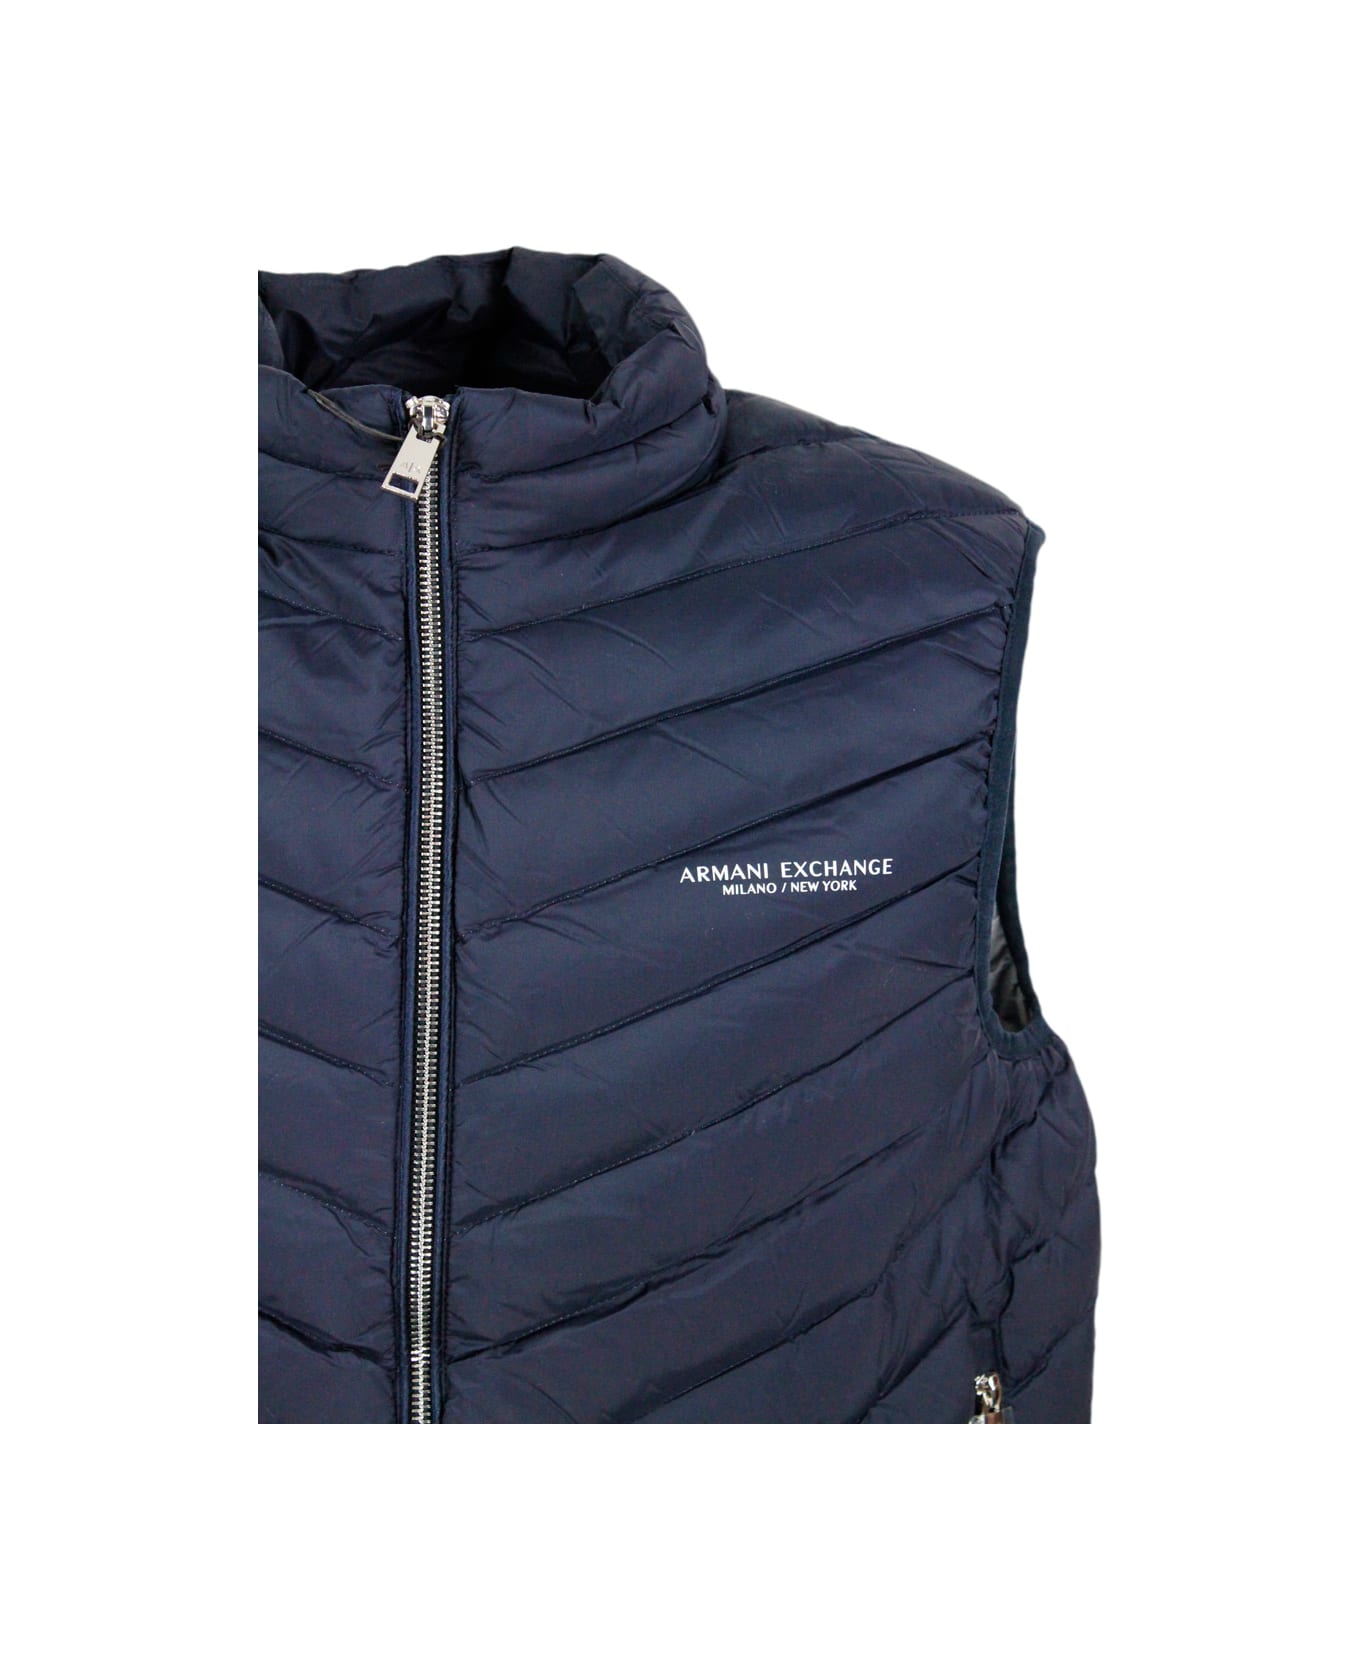 Armani Collezioni Sleeveless Vest In Light Down Jacket With Logoed And Elasticated Bottom And Zip Closure - Blu ベスト